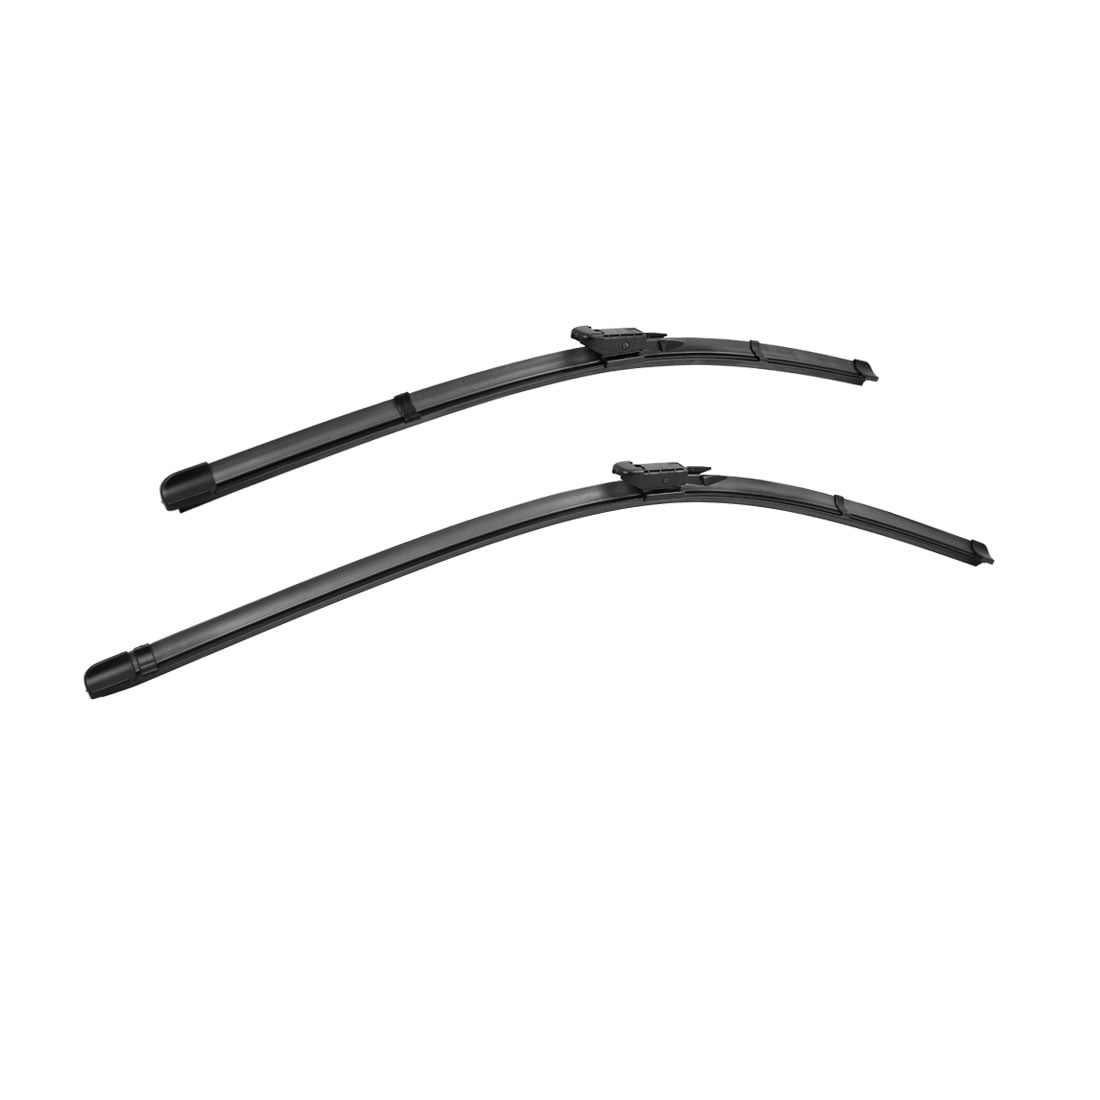 26/20 2 wipers Replacement for 2005-2012 Toyota Avalon Windshield Wiper Blades Original Equipment Replacement Pinch Tab Set of 2